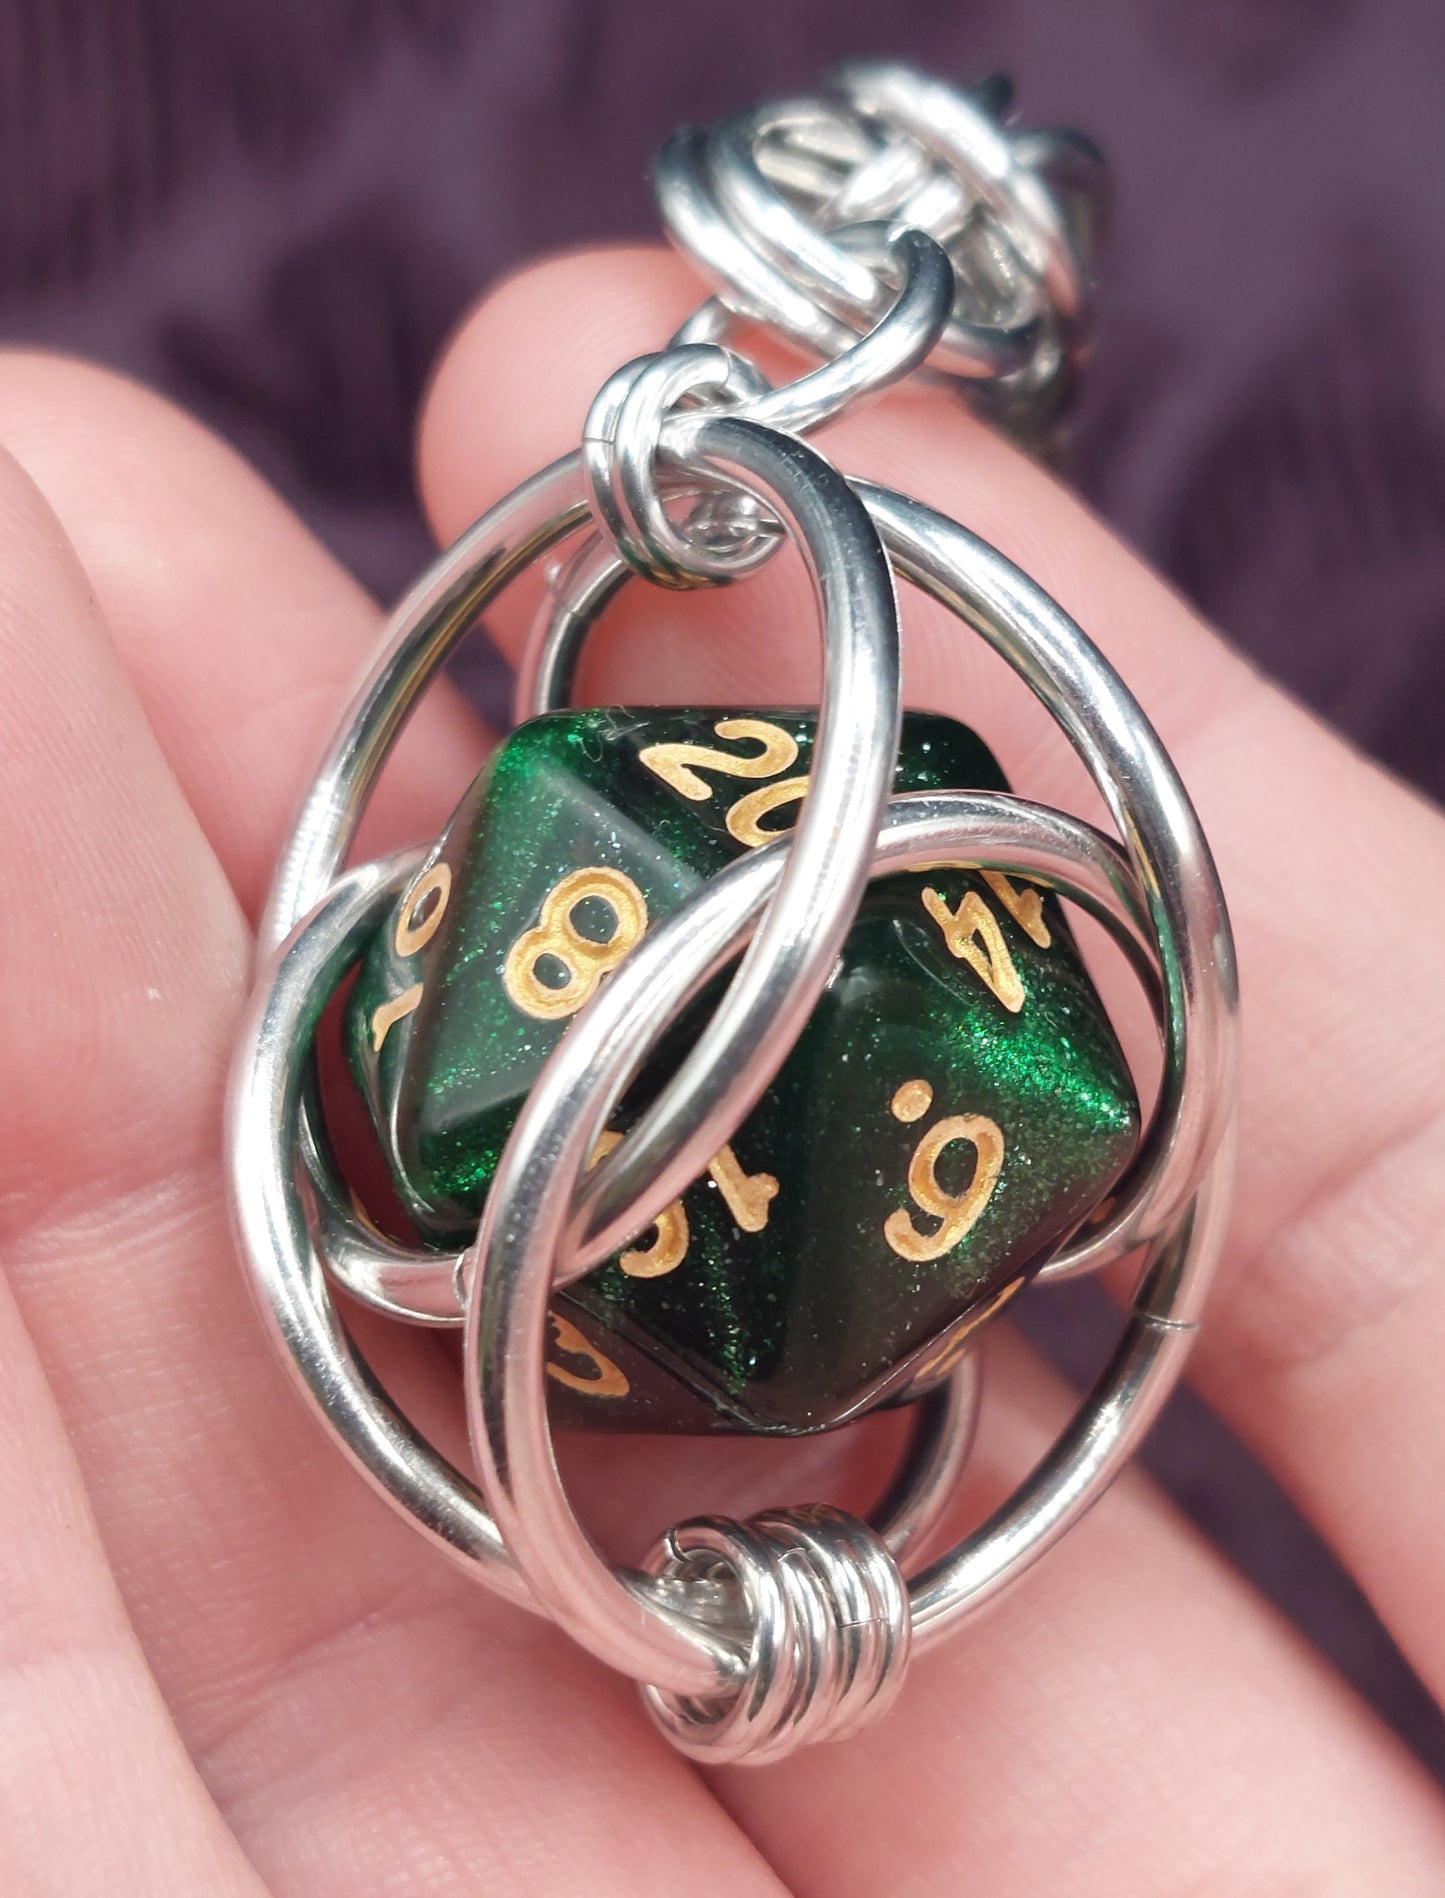 D20 Chain Maille Key Chain - Locally Made